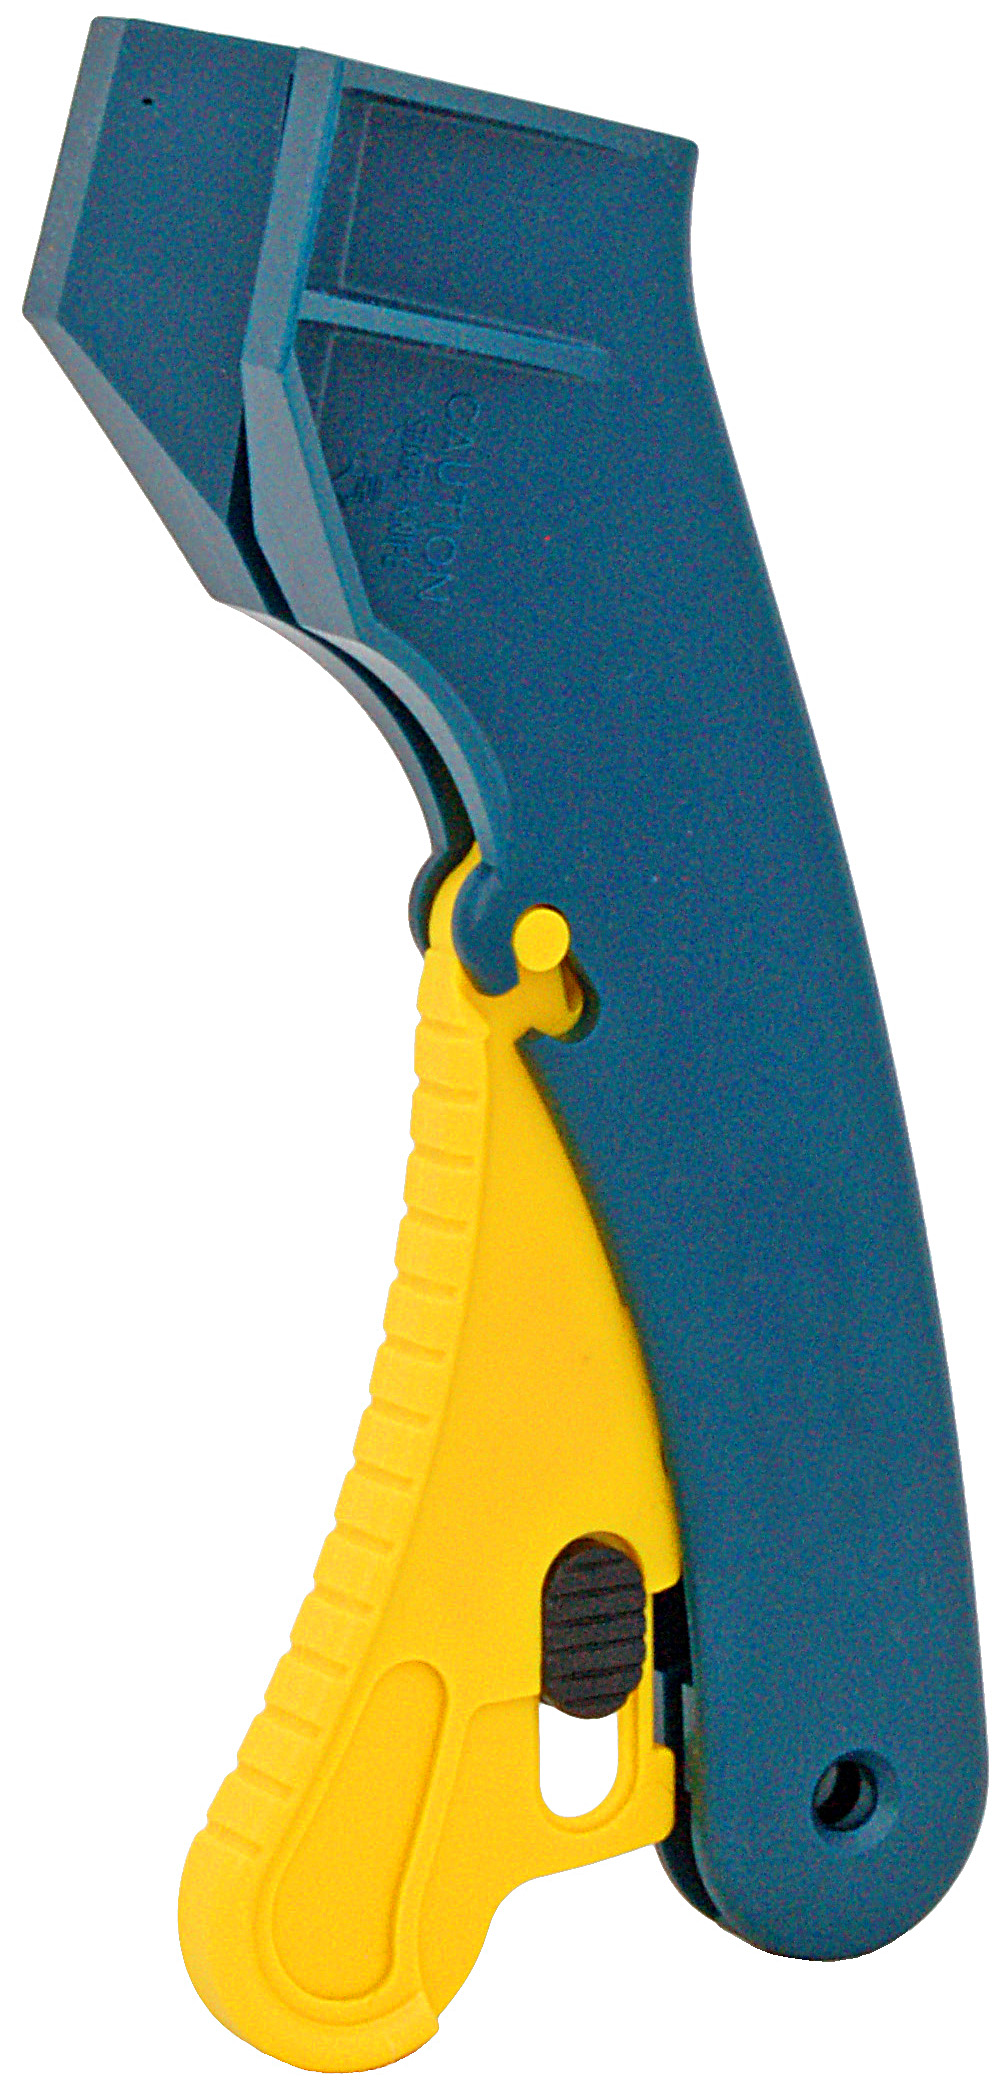 Zenport Box Knife UK209 Box Top Cutter Utility Knife with Safety Lock